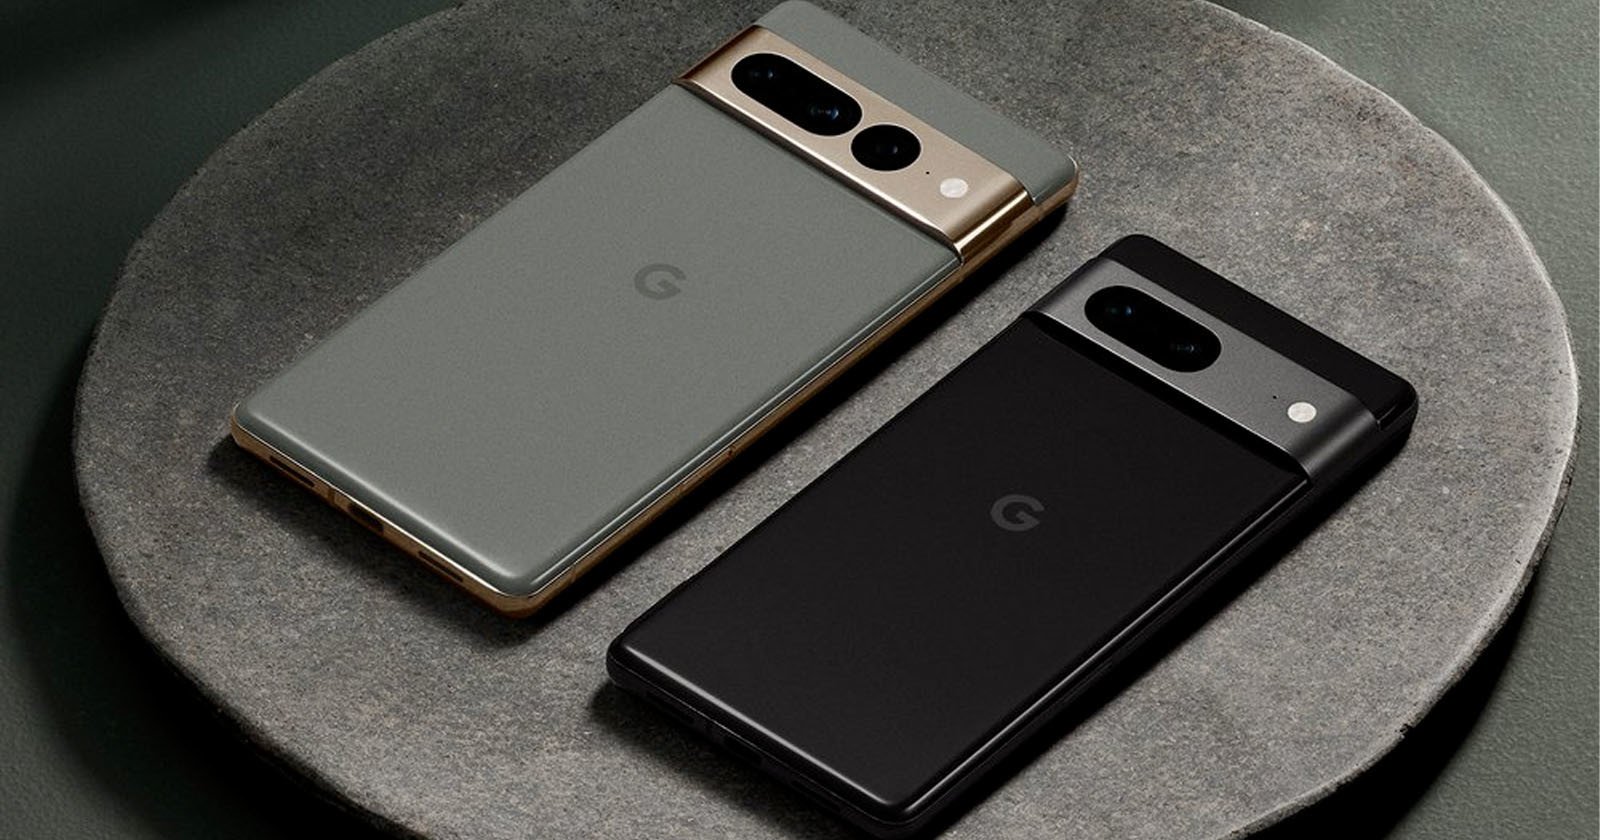 Googles New Pixel 7 and Pixel 7 Pro Phones Feature Improved Cameras